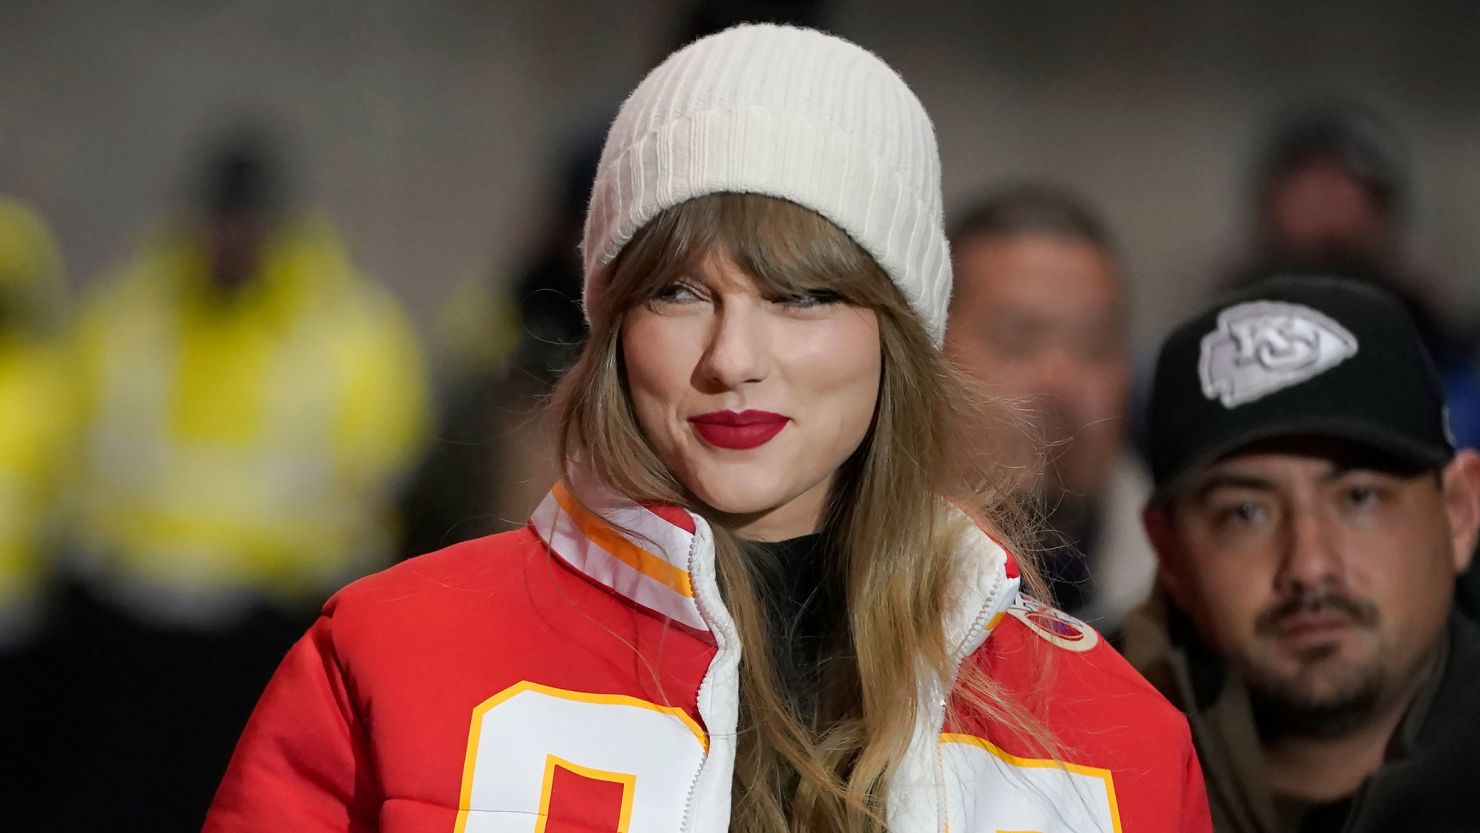 Where did Taylor Swift get her Chiefs jacket? Her game-day oufit